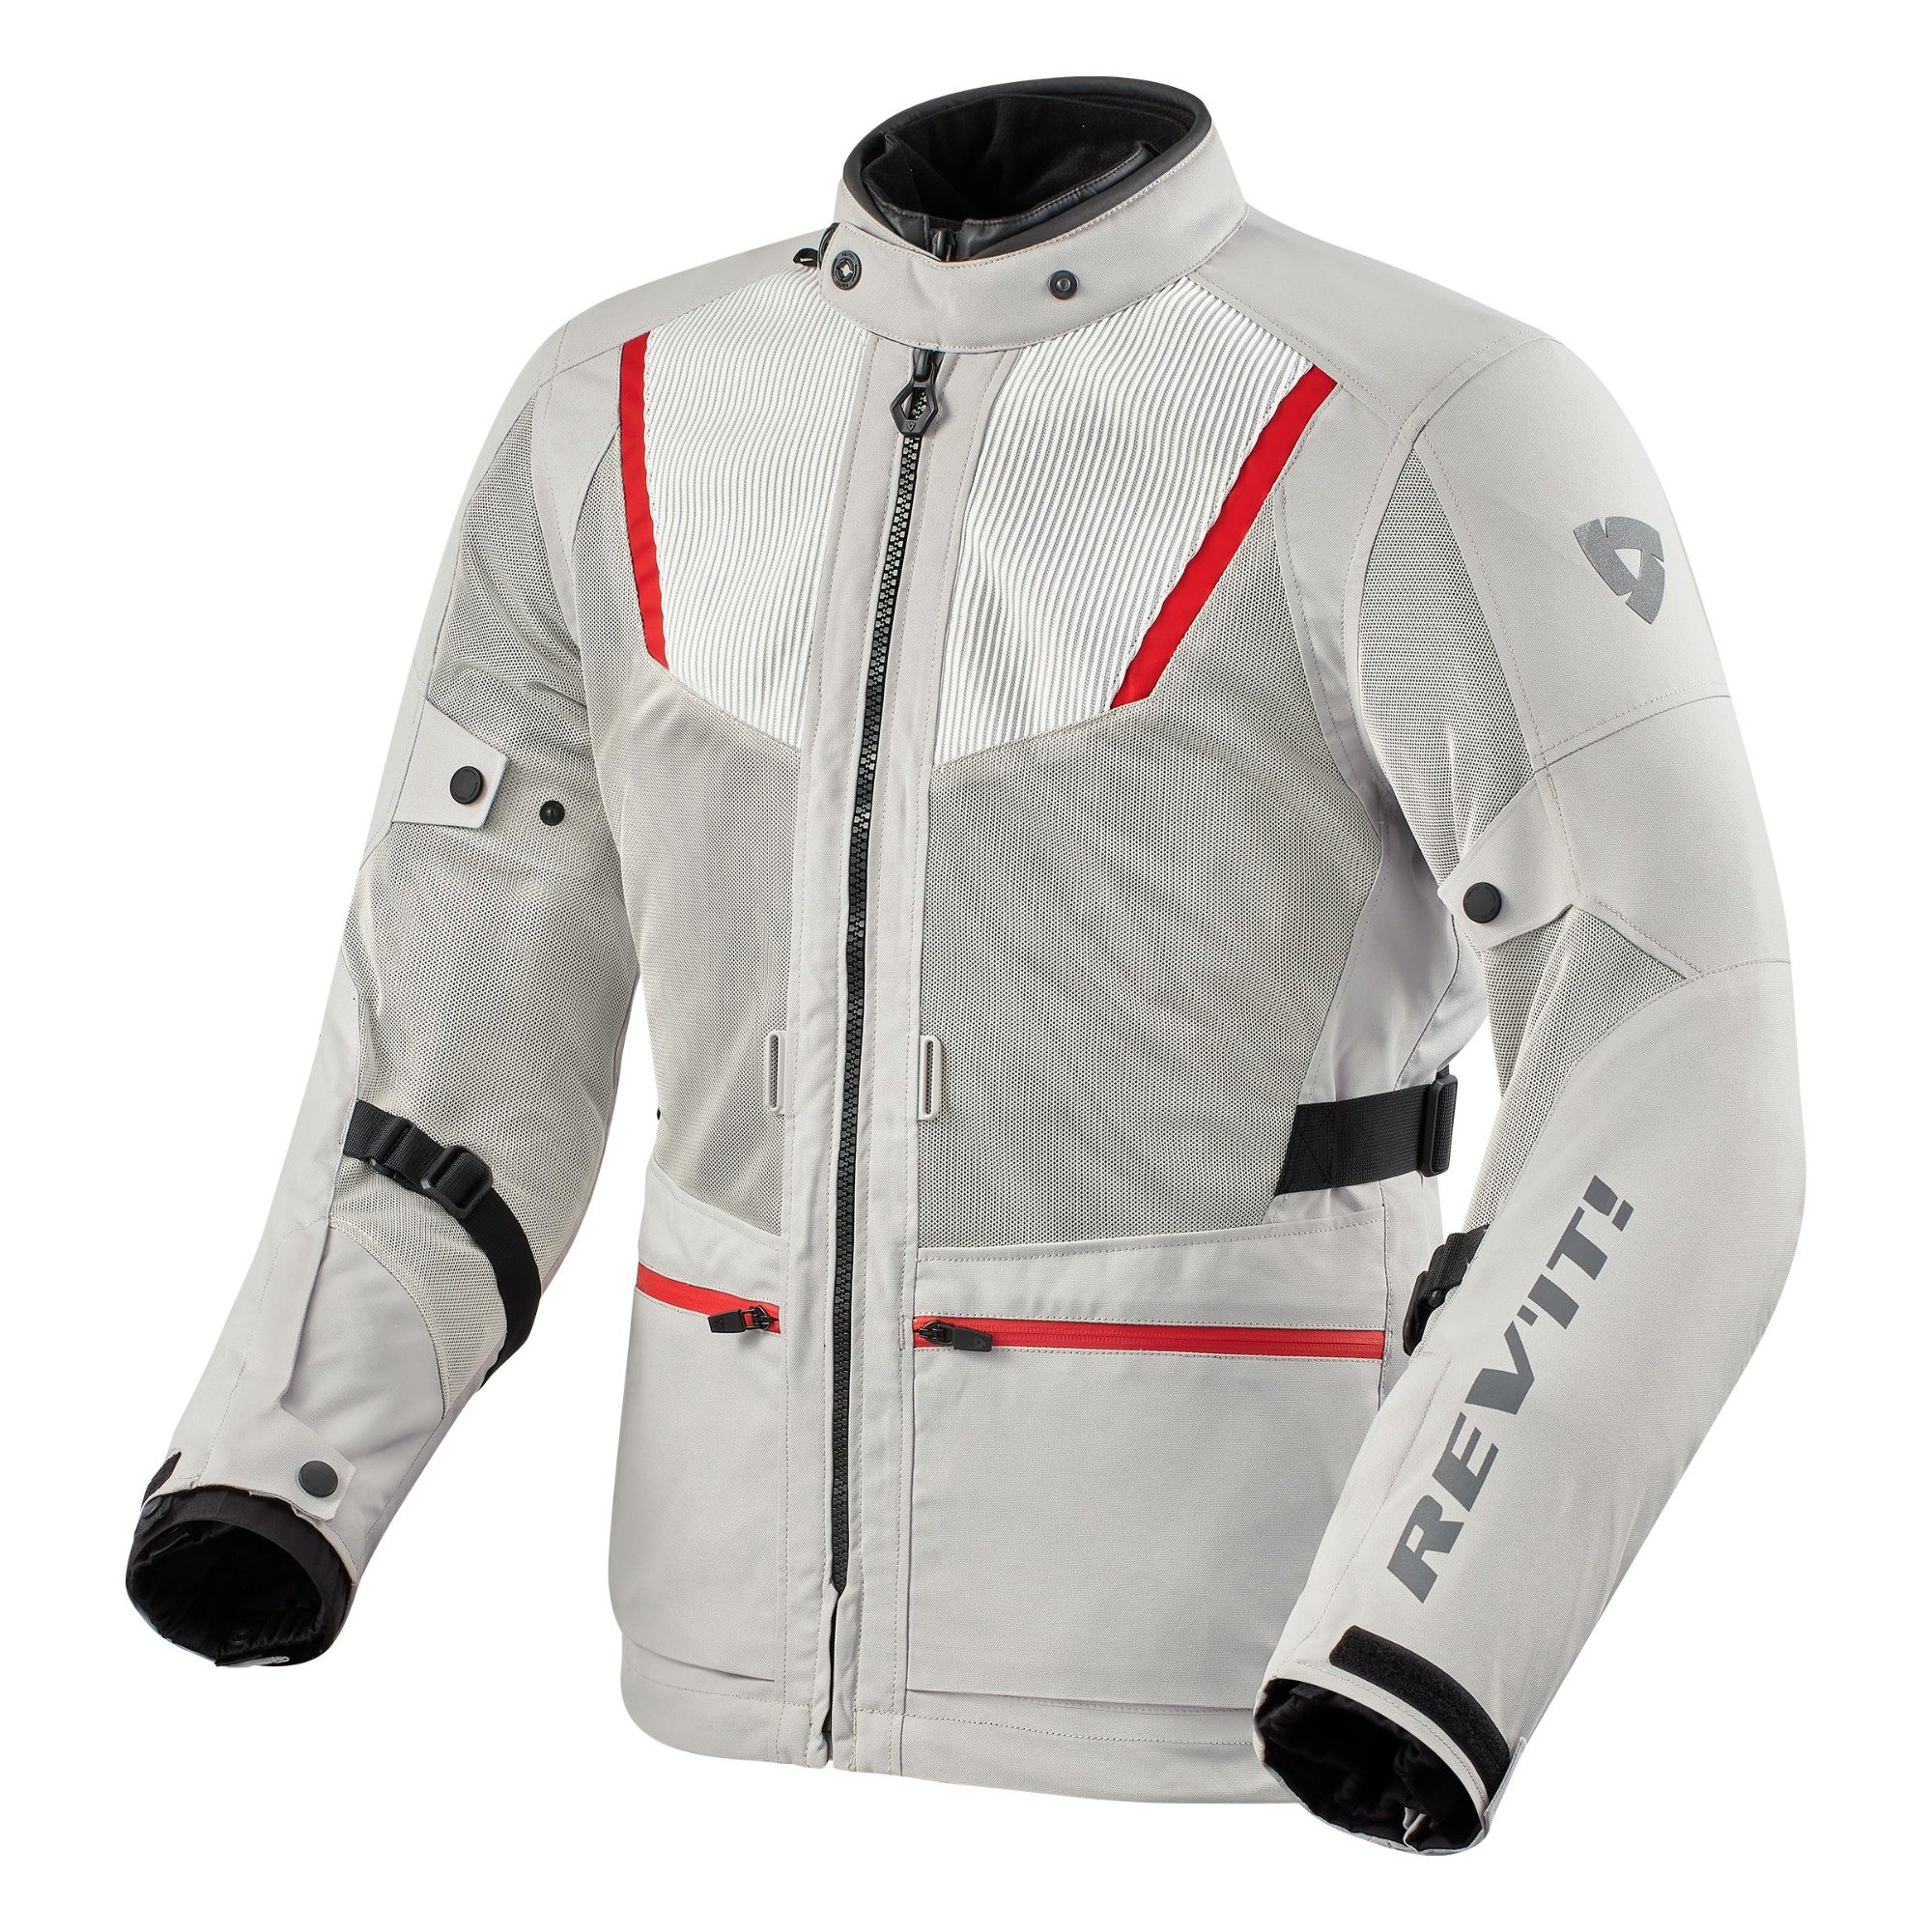 Image of REV'IT! Levante 2 H2O Jacket Silver Size XL ID 8700001332637